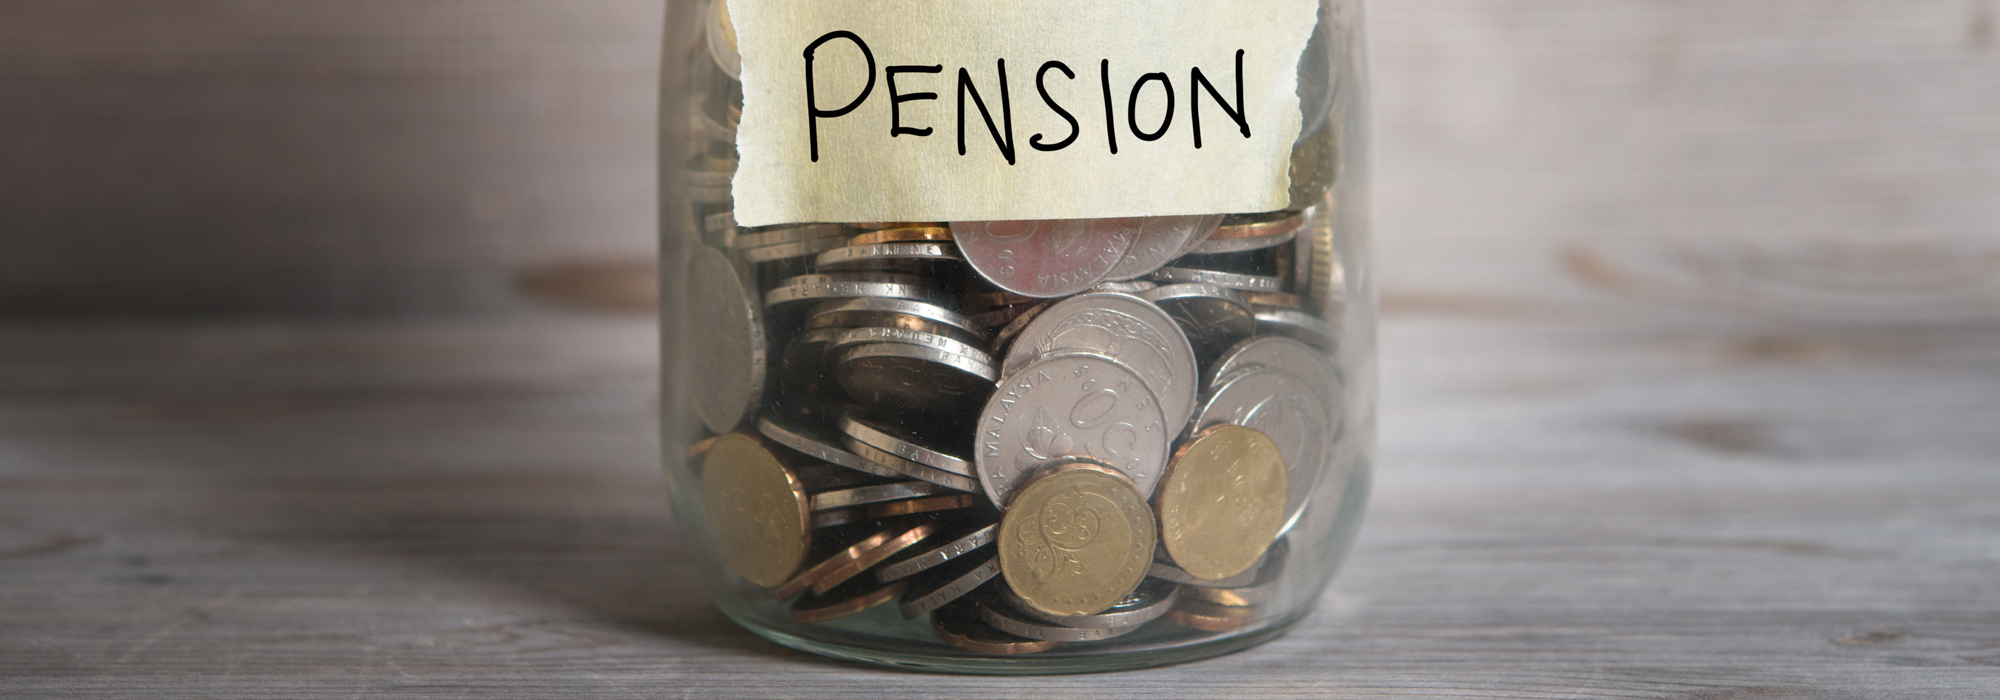 The real impact of the pension reform plan